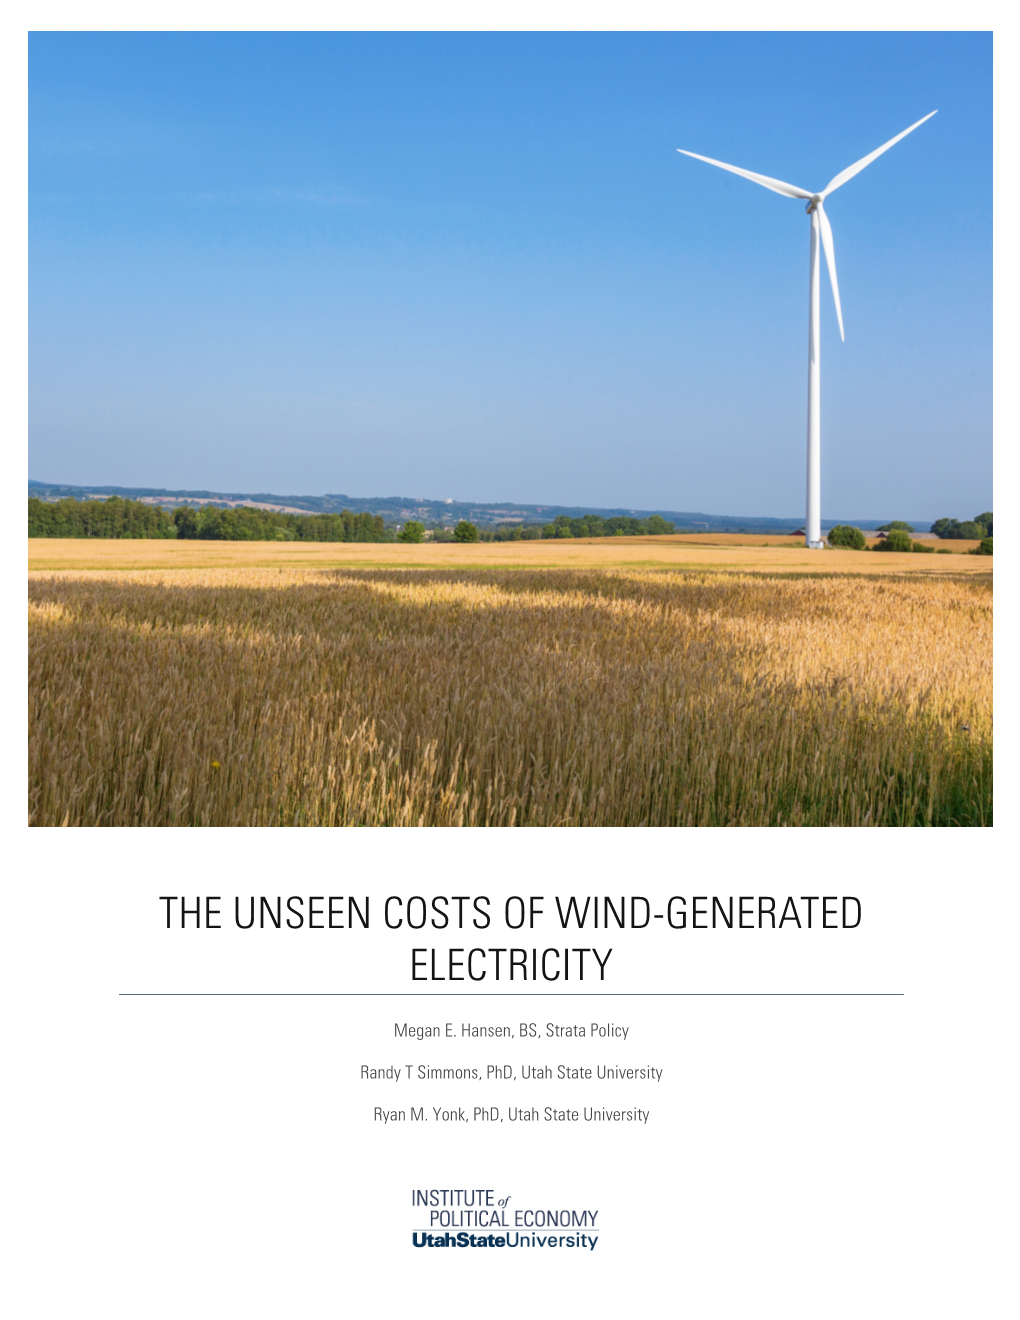 The Unseen Costs of Wind-Generated Electricity